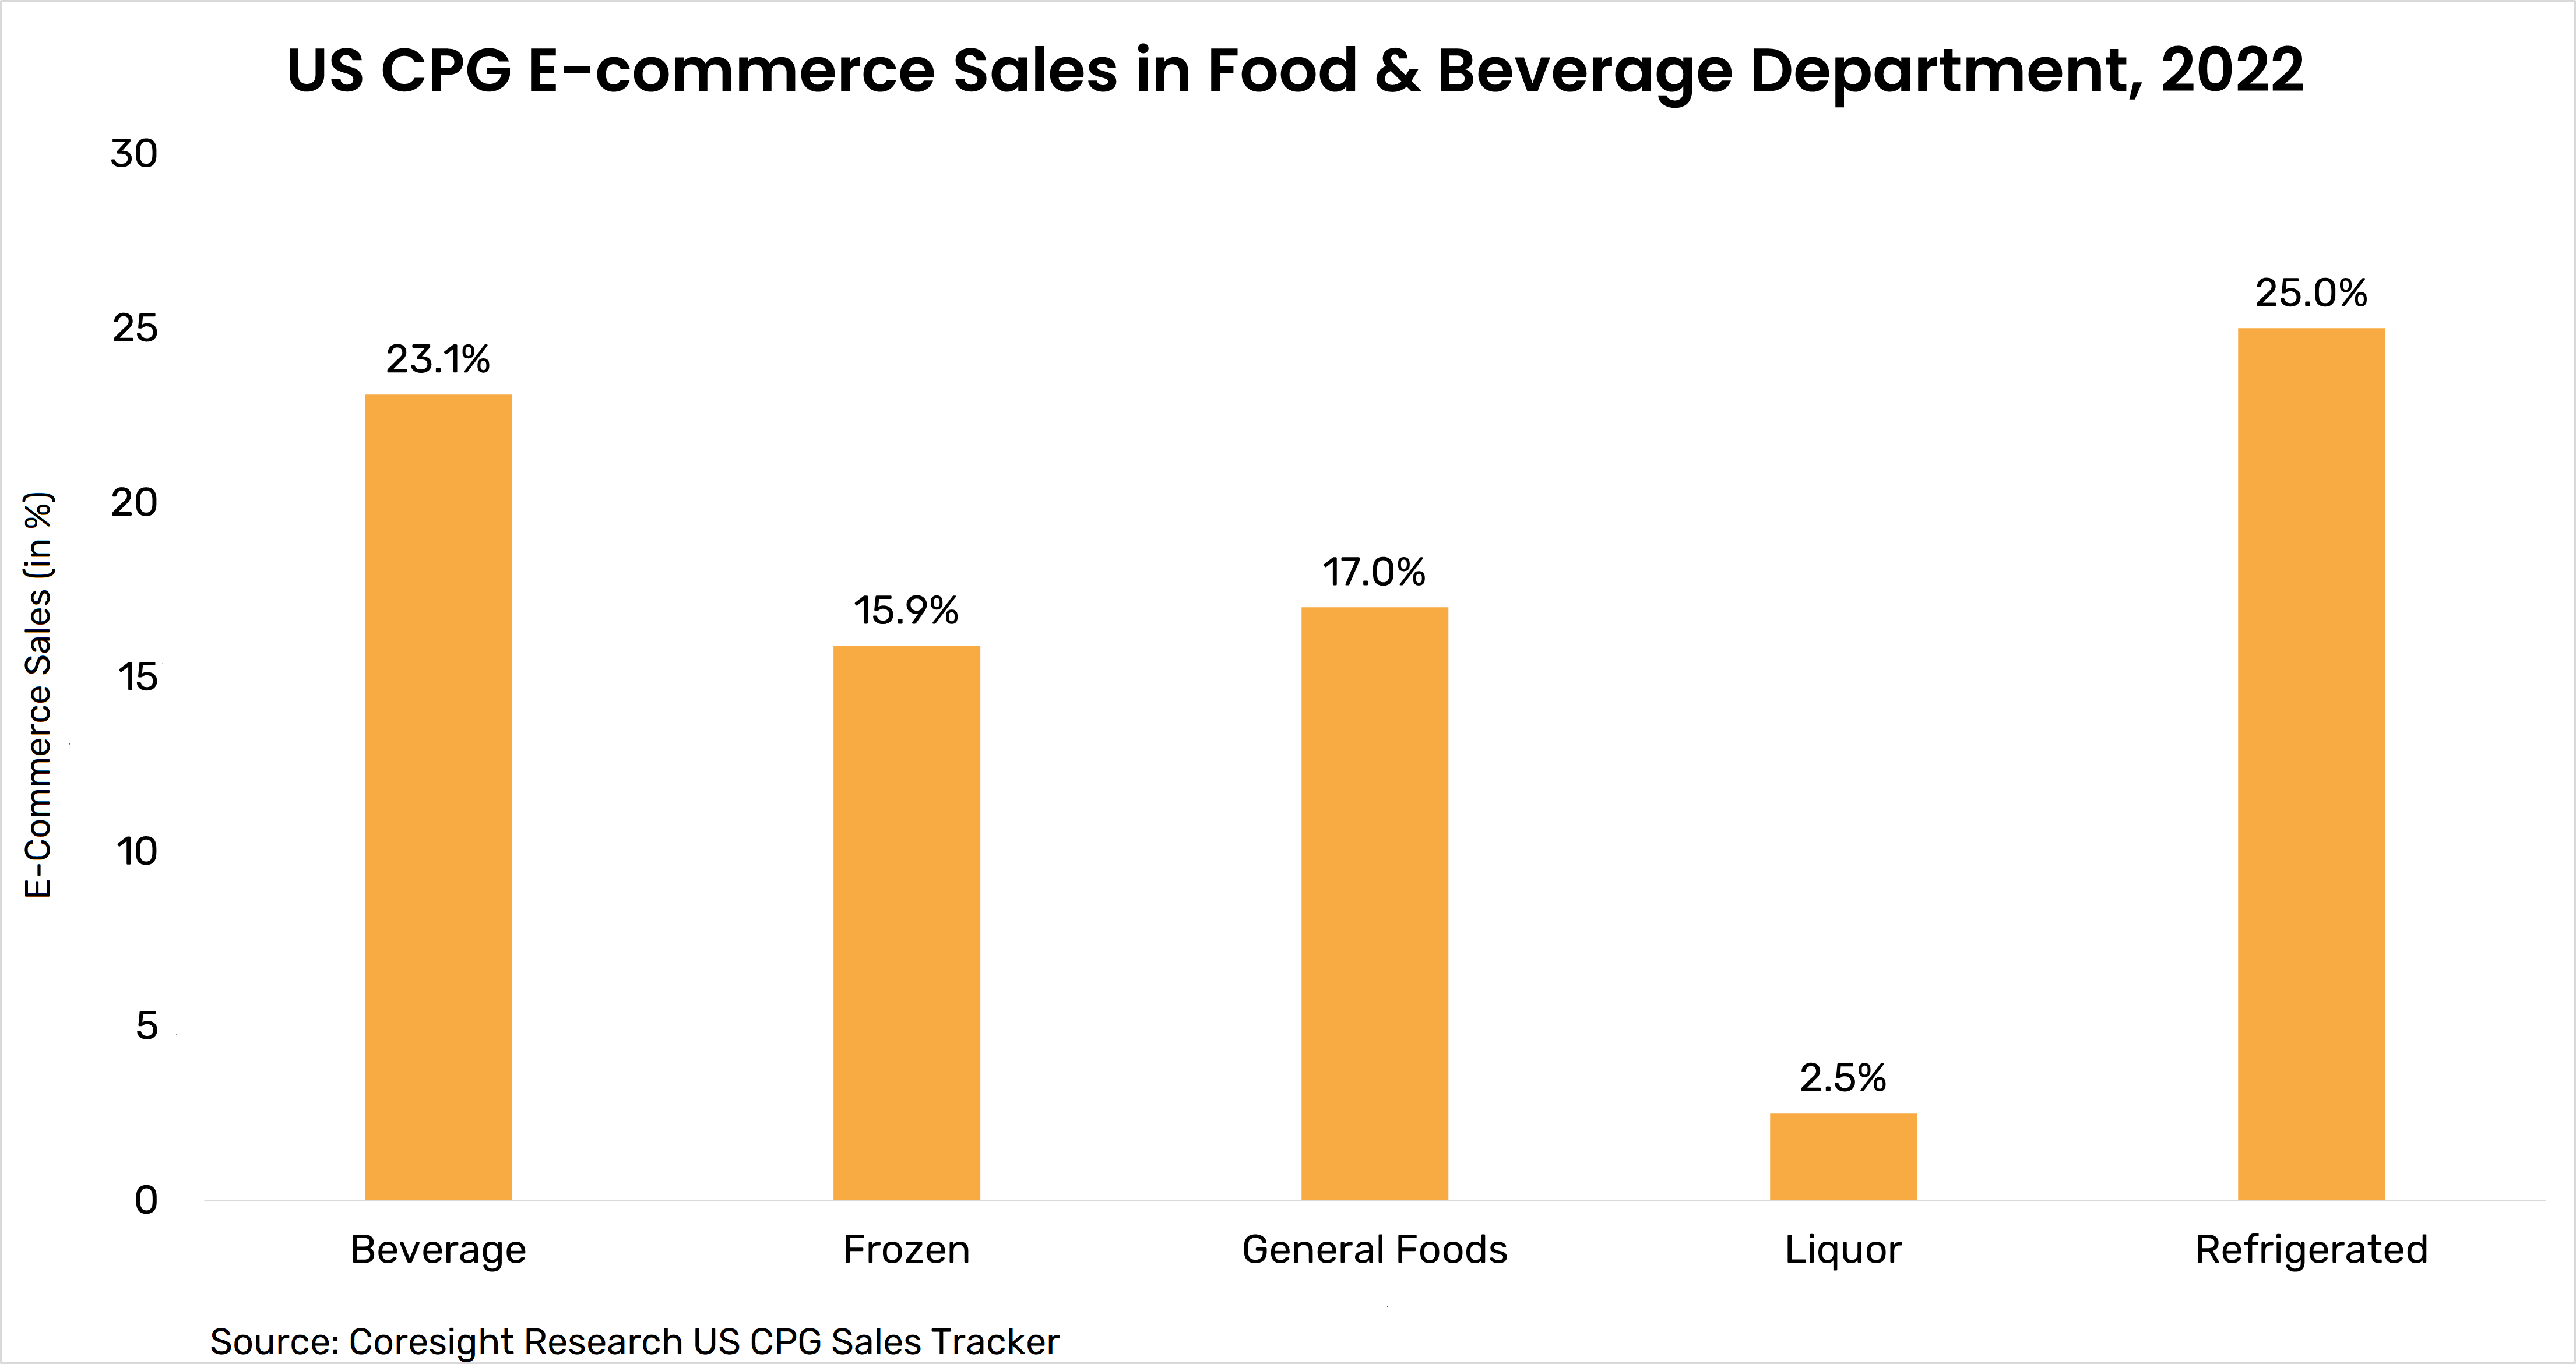 MetricsCart chart showing cpg ecommerce sales for food and beverage department in the US, 2022